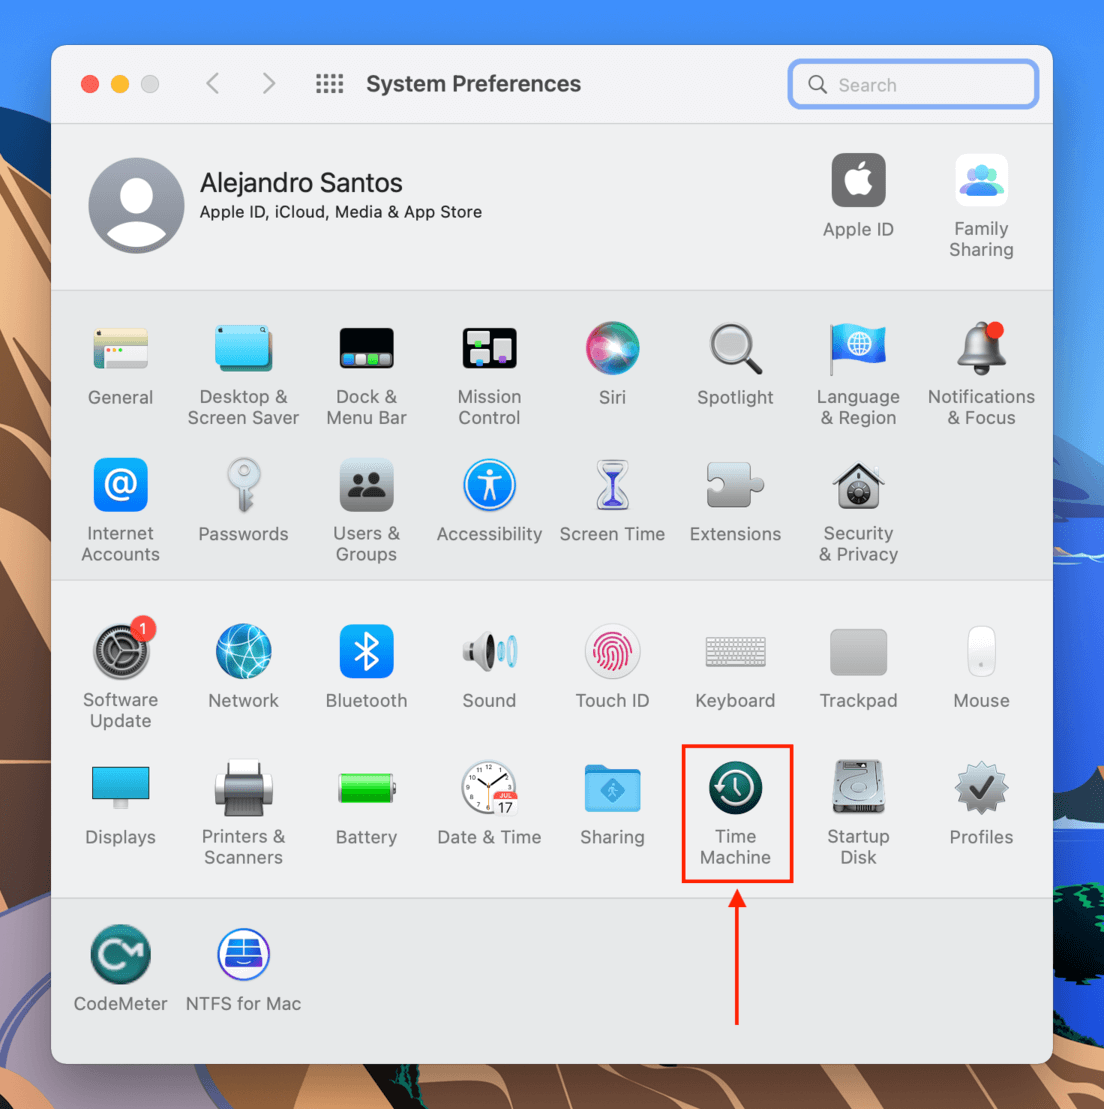 Time Machine settings in the System Preferences window